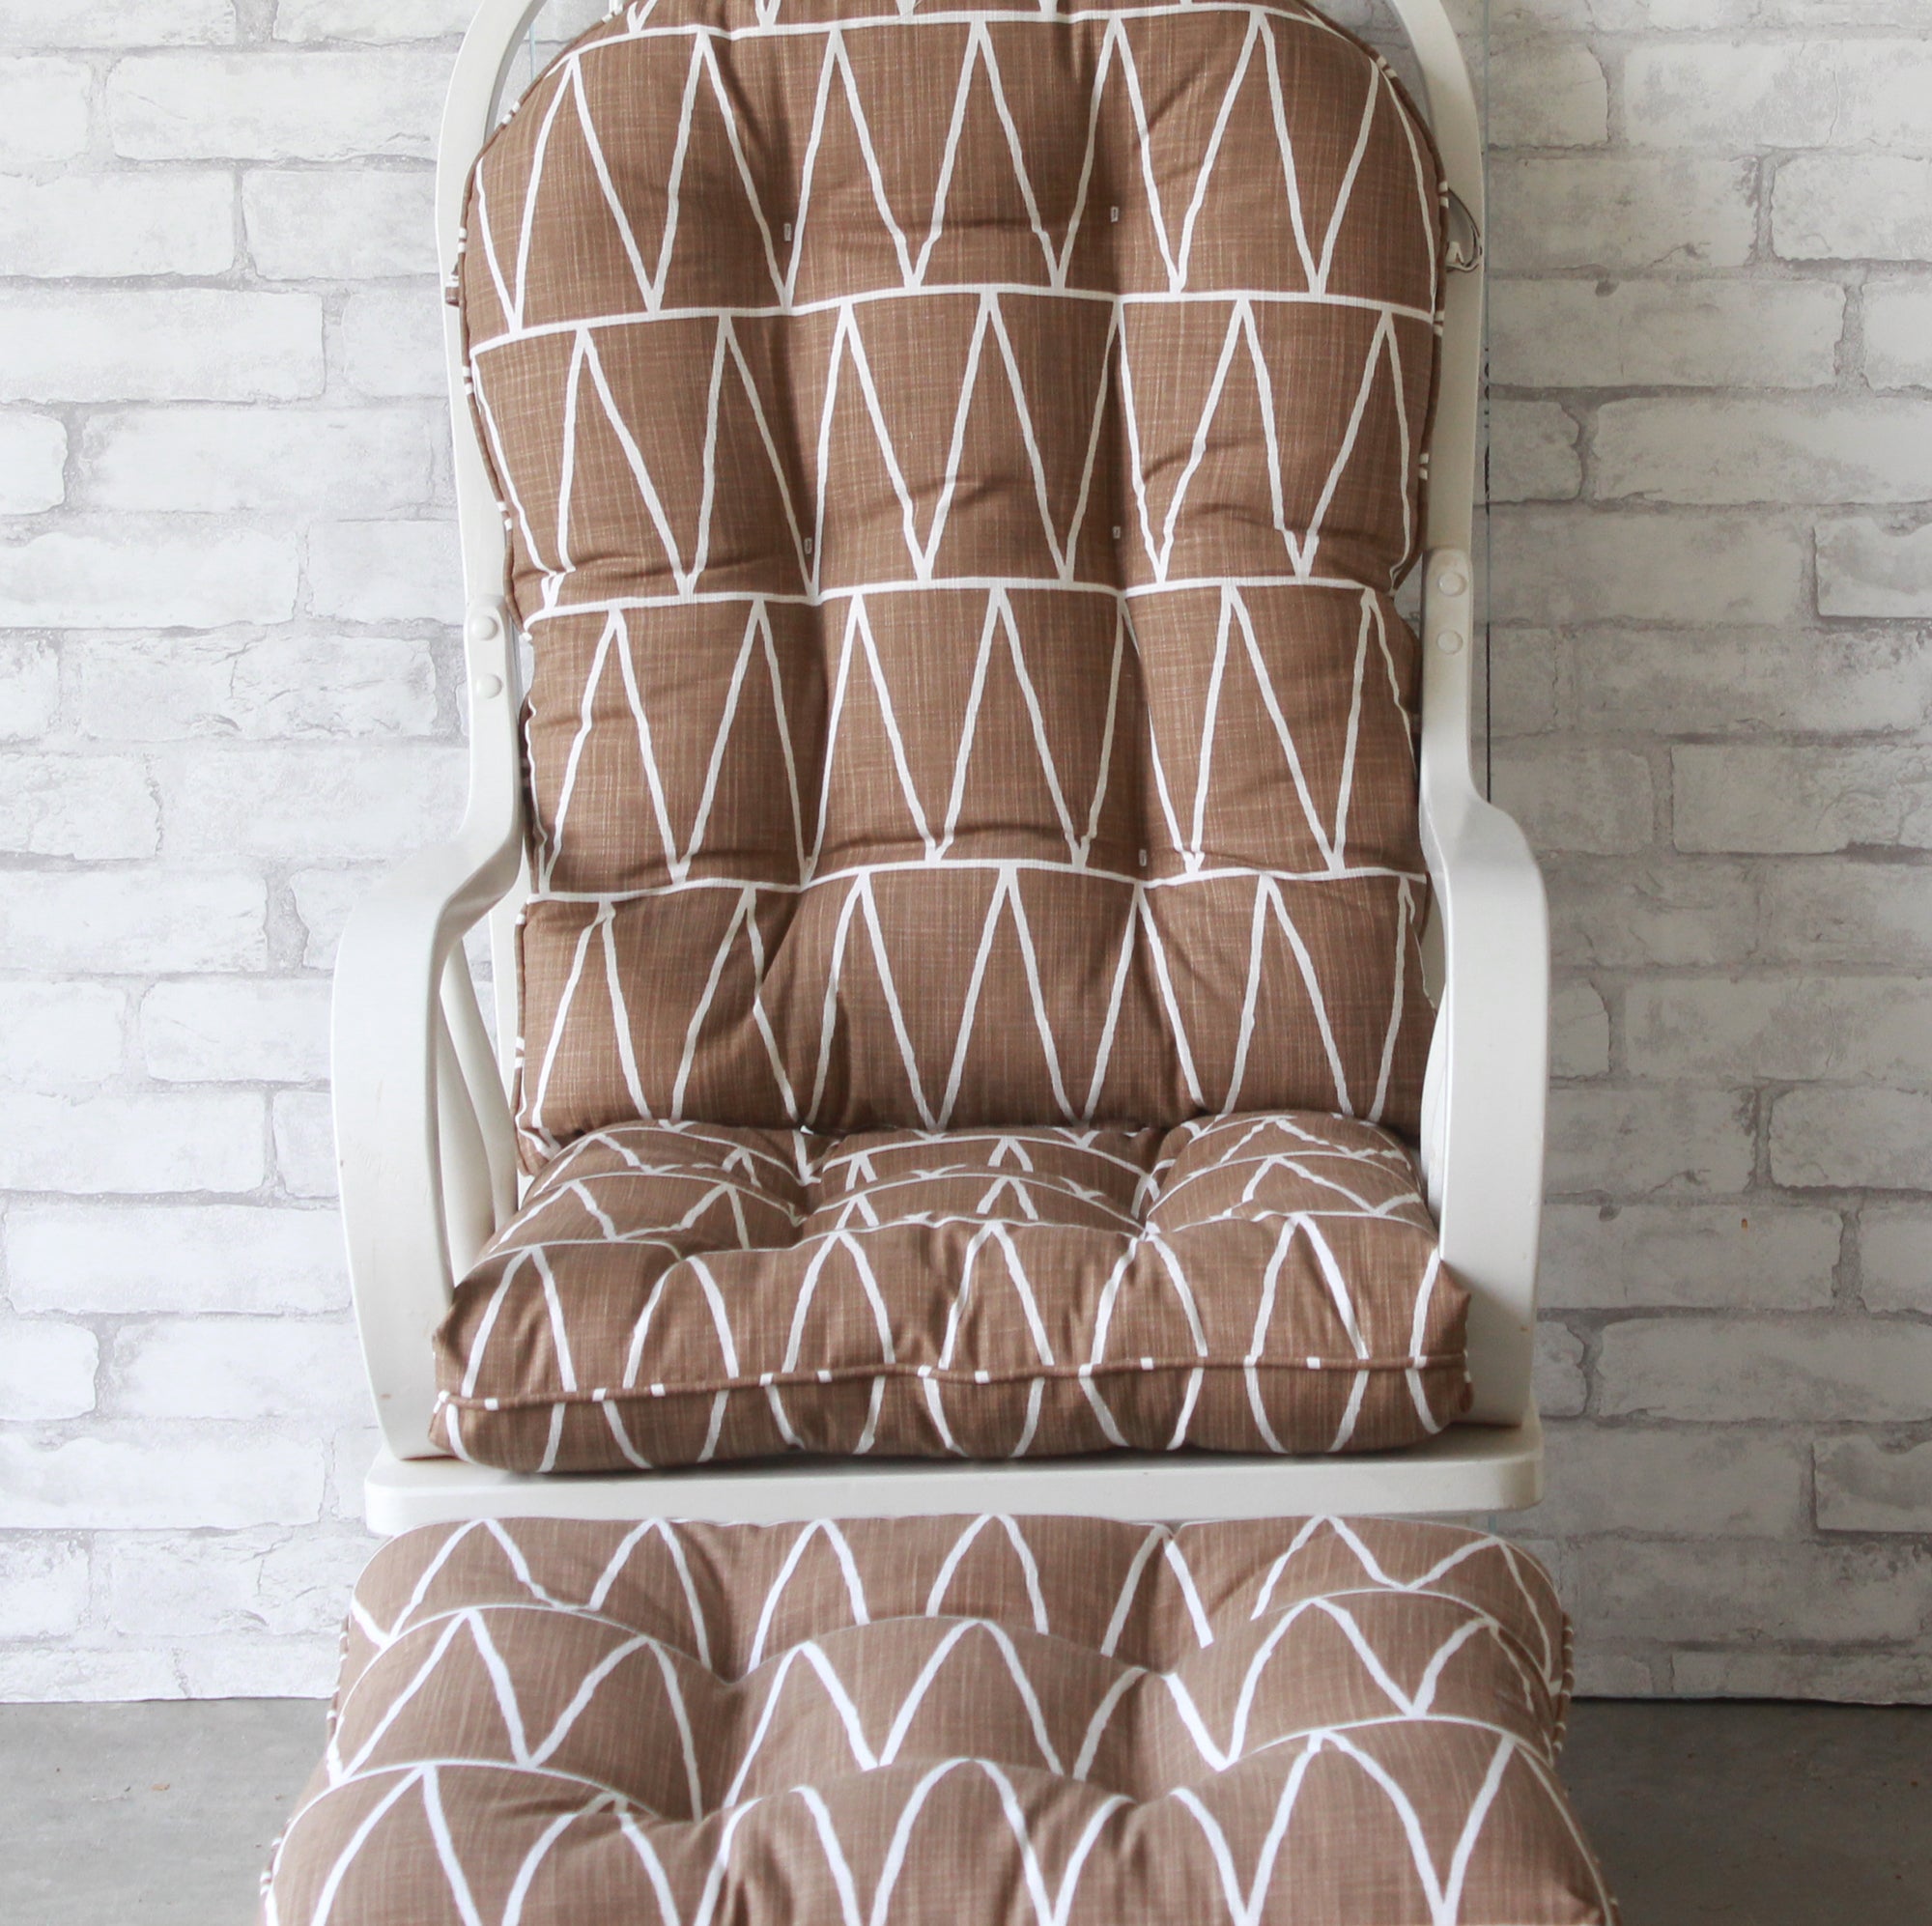 glider rocker cushions and ottoman cushion in brown fabric with white triangles